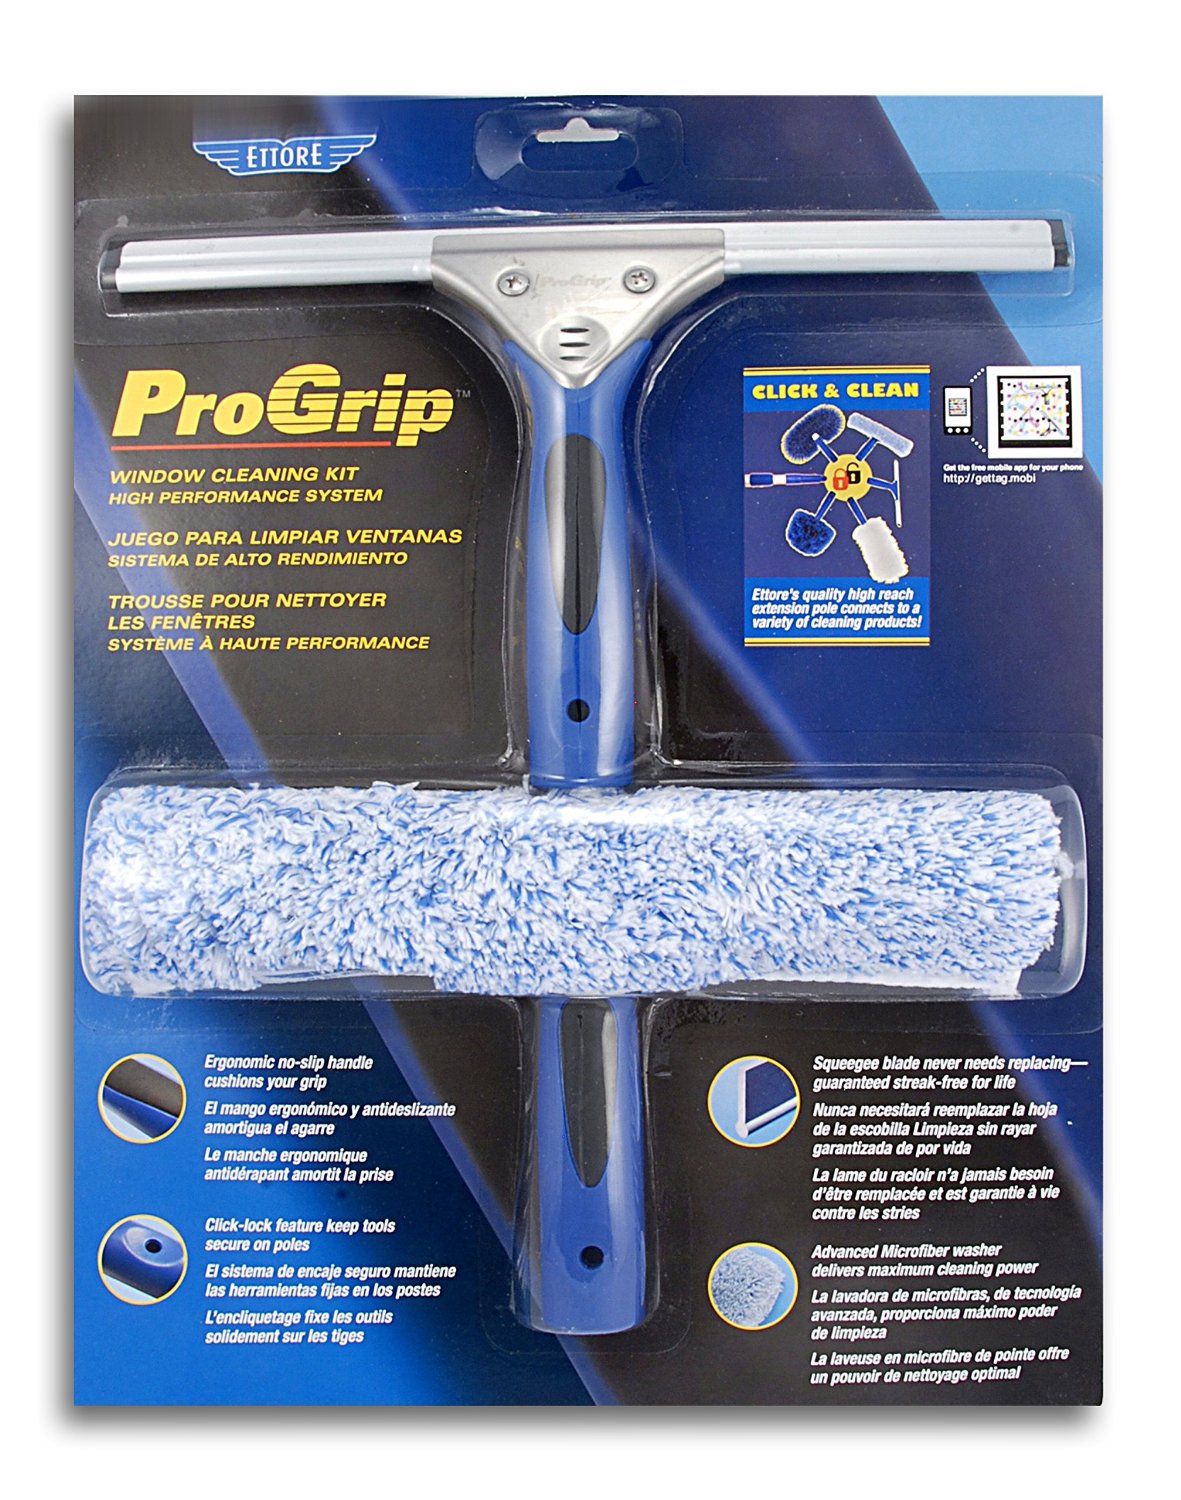 Ettore 65000 Professional Progrip Window Cleaning Kit